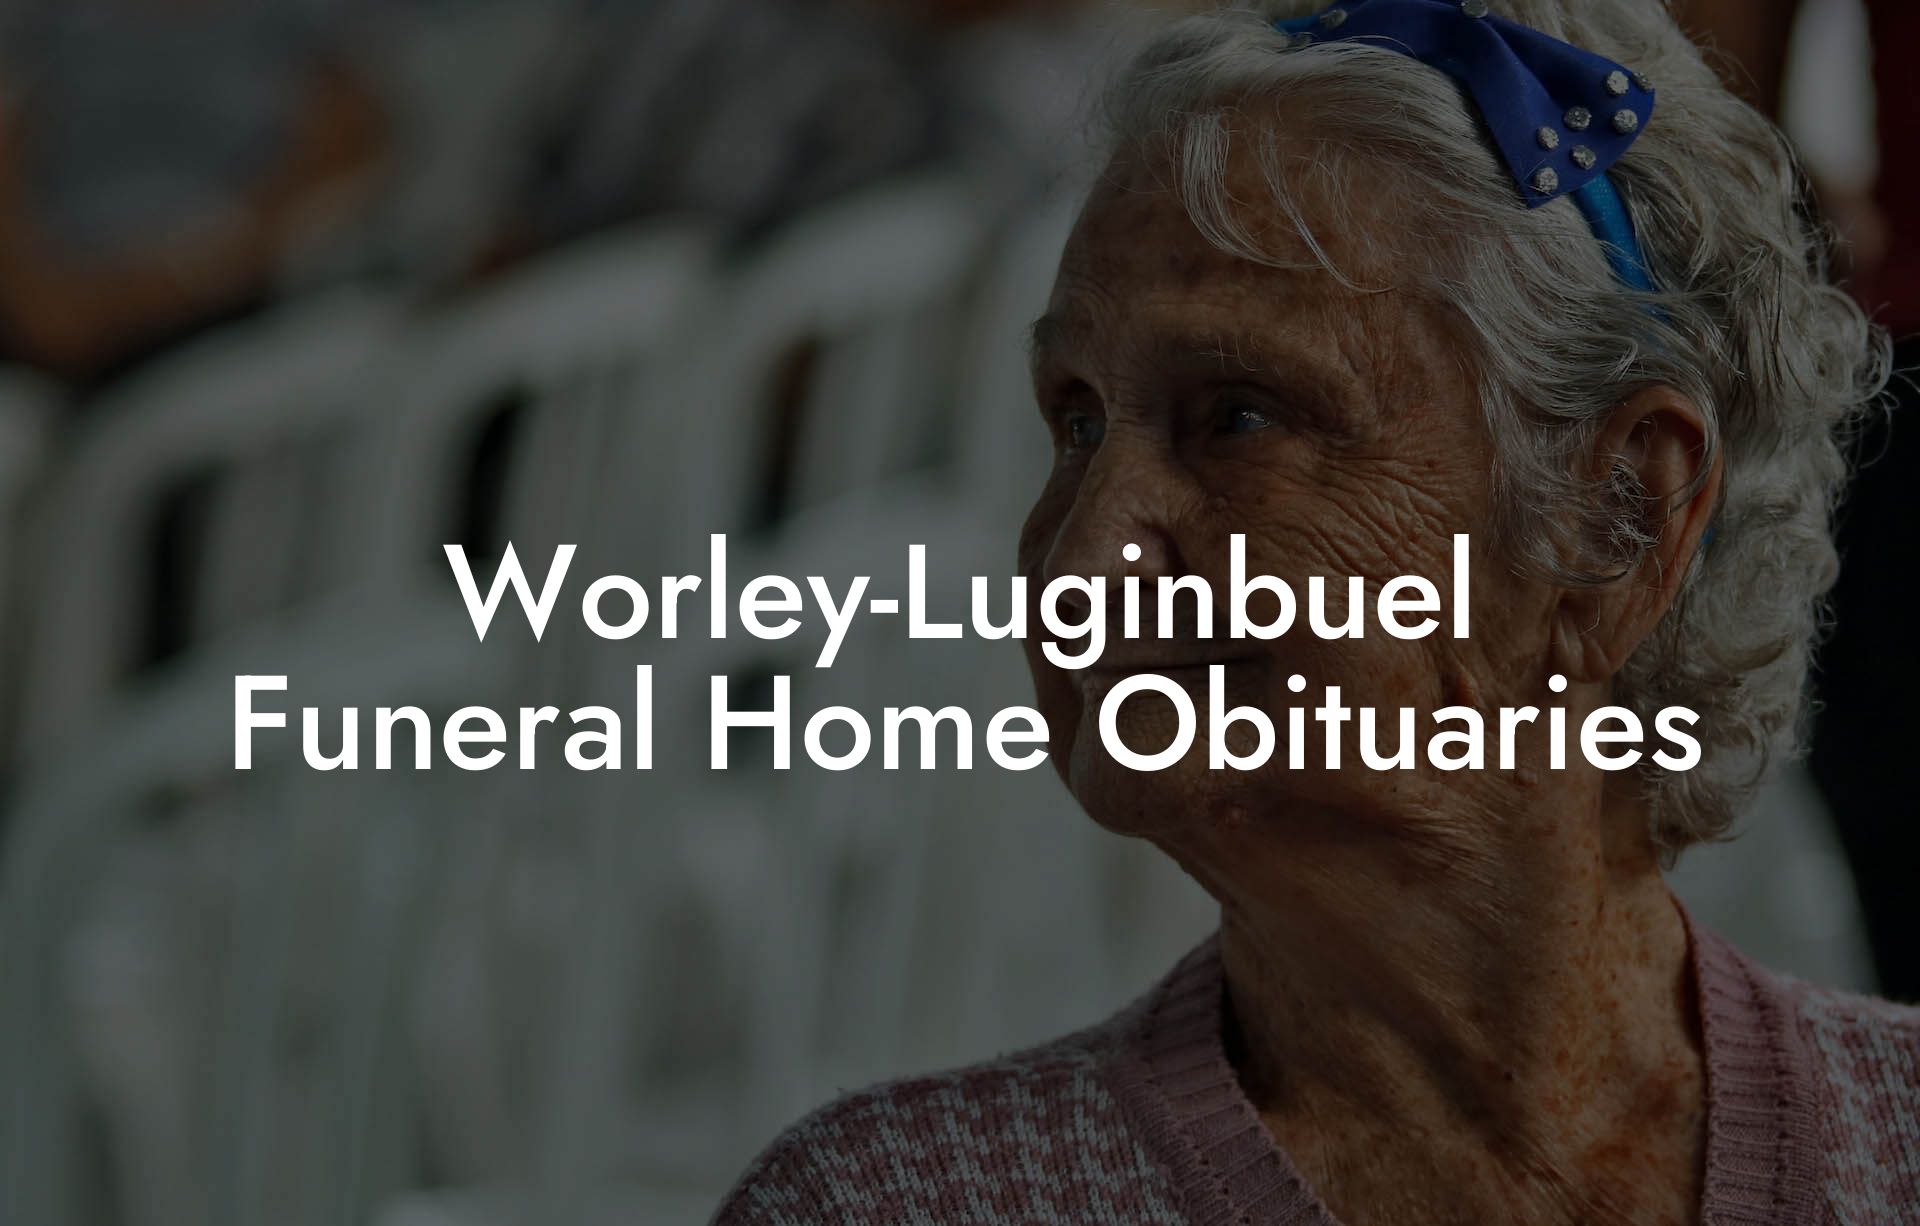 Worley-Luginbuel Funeral Home Obituaries